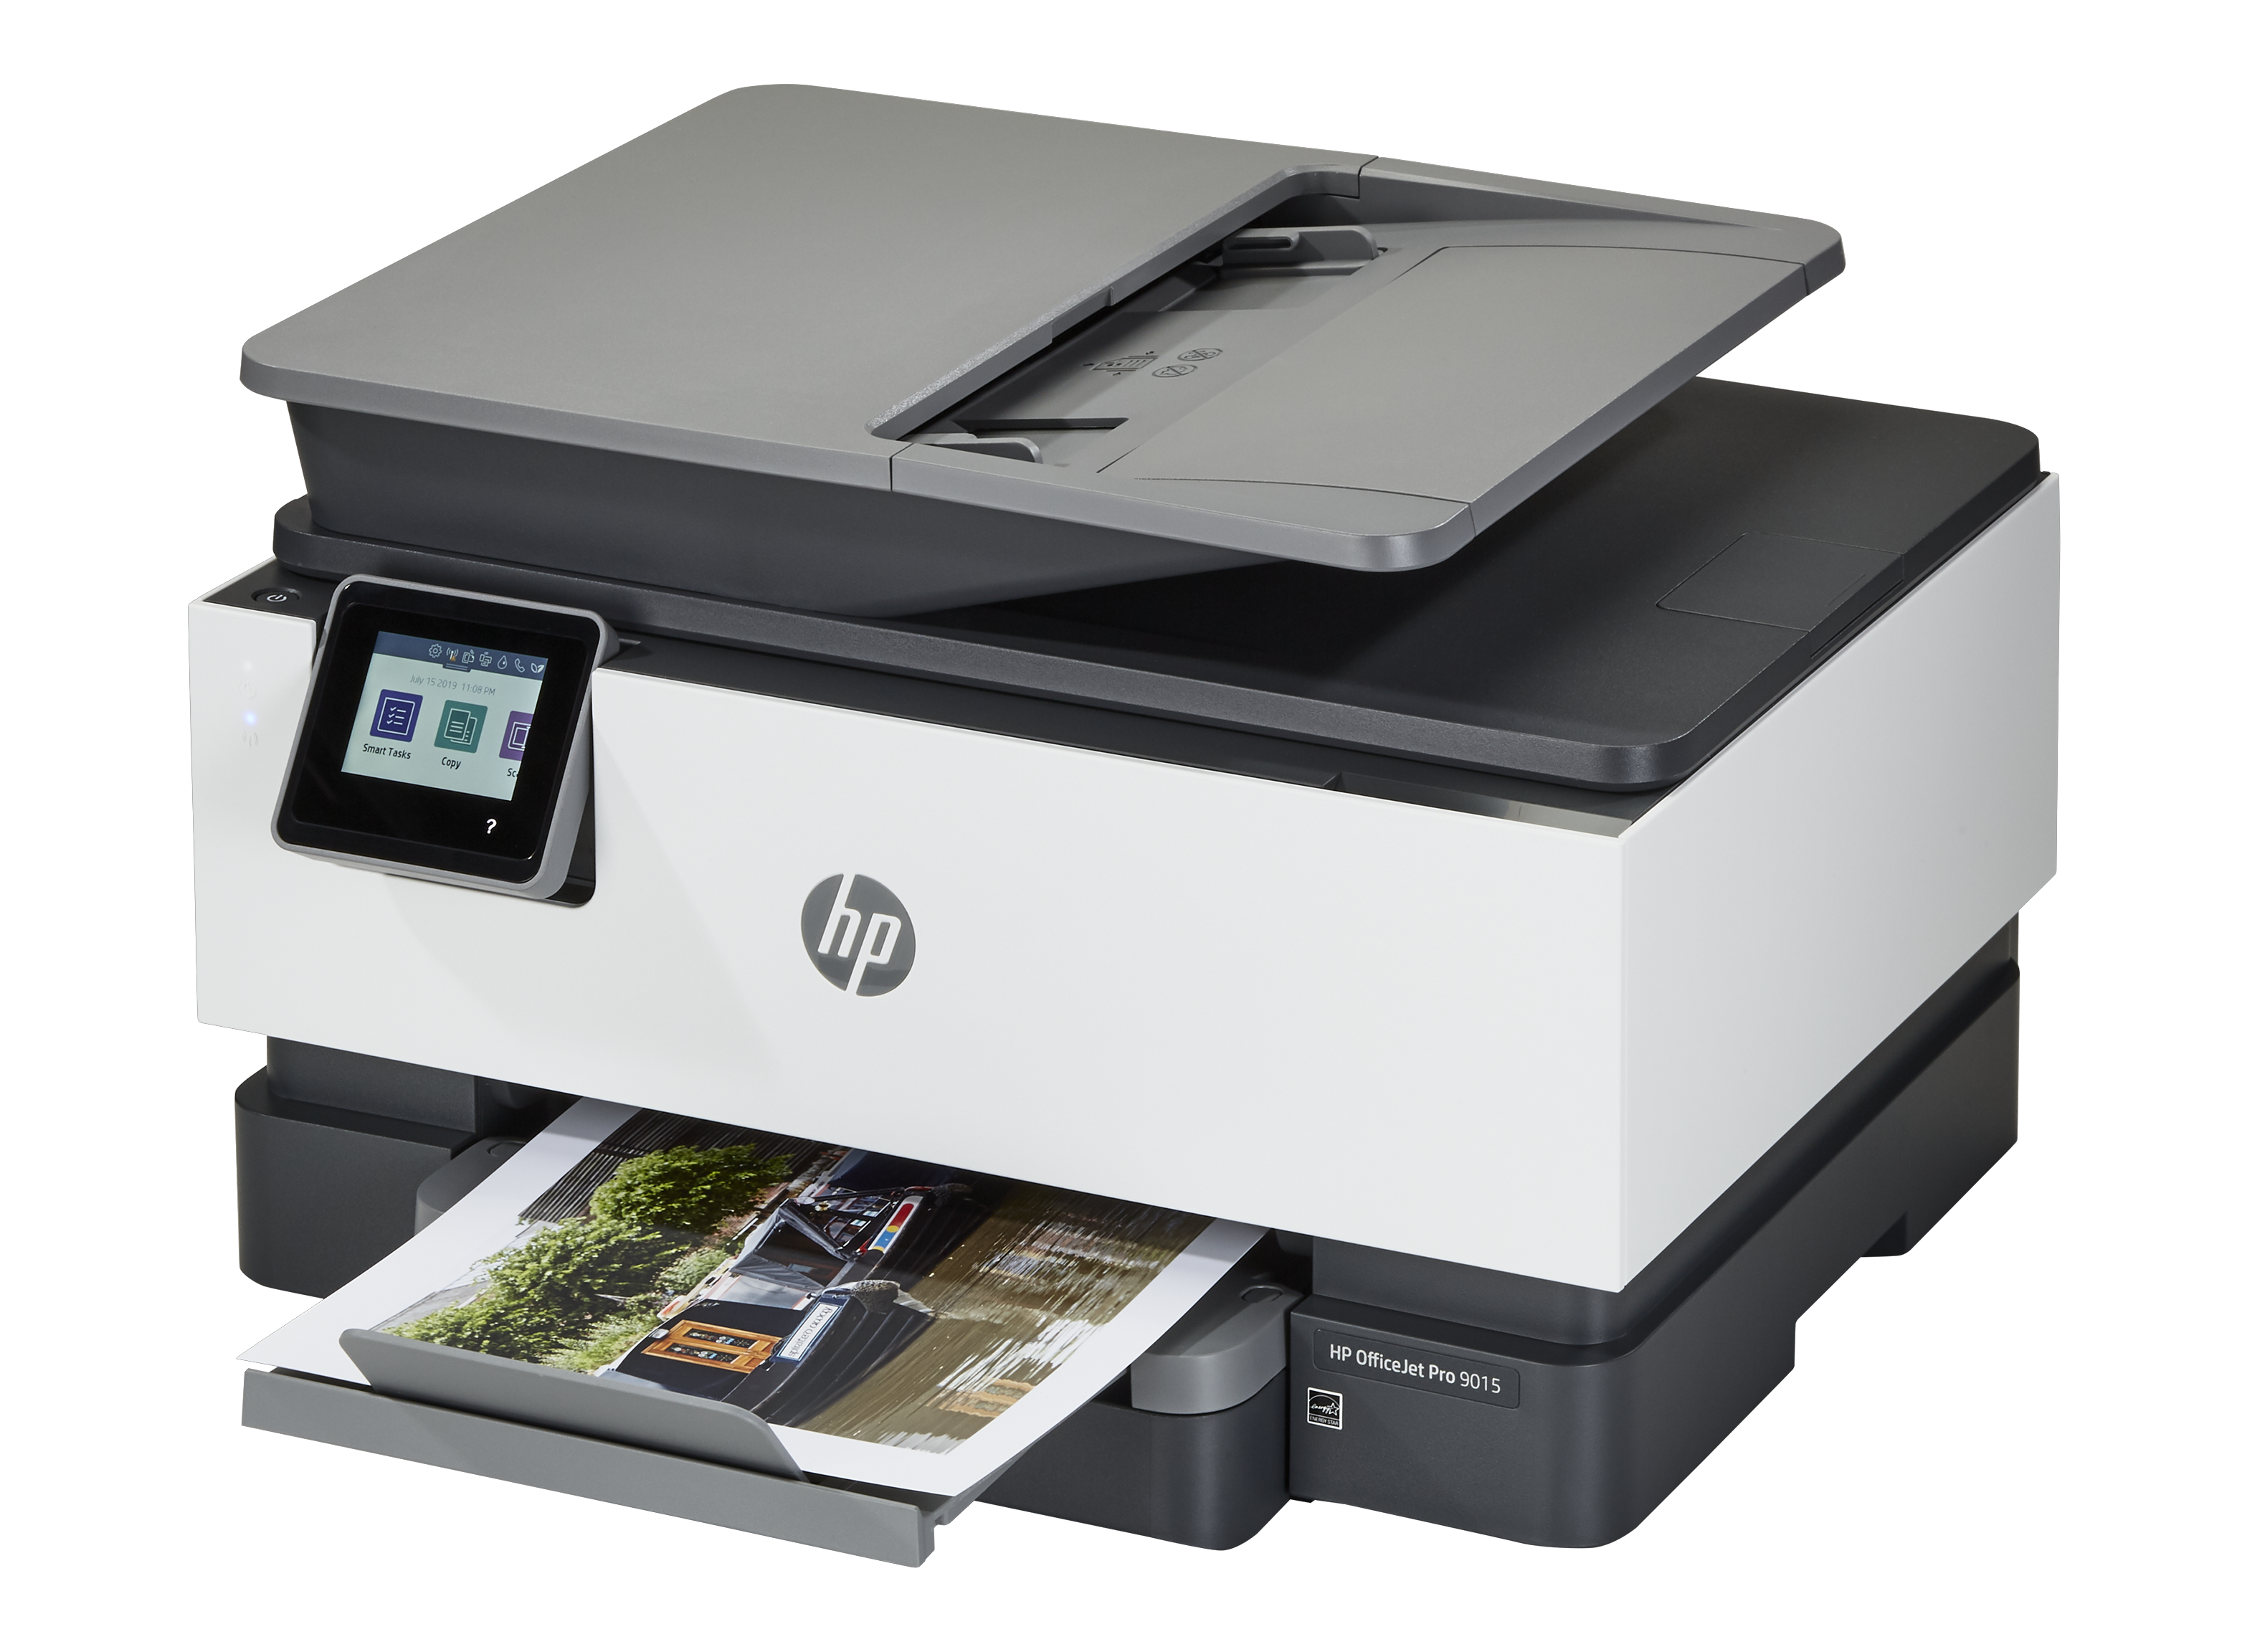 HP Officejet Pro Printer Review - Consumer Reports